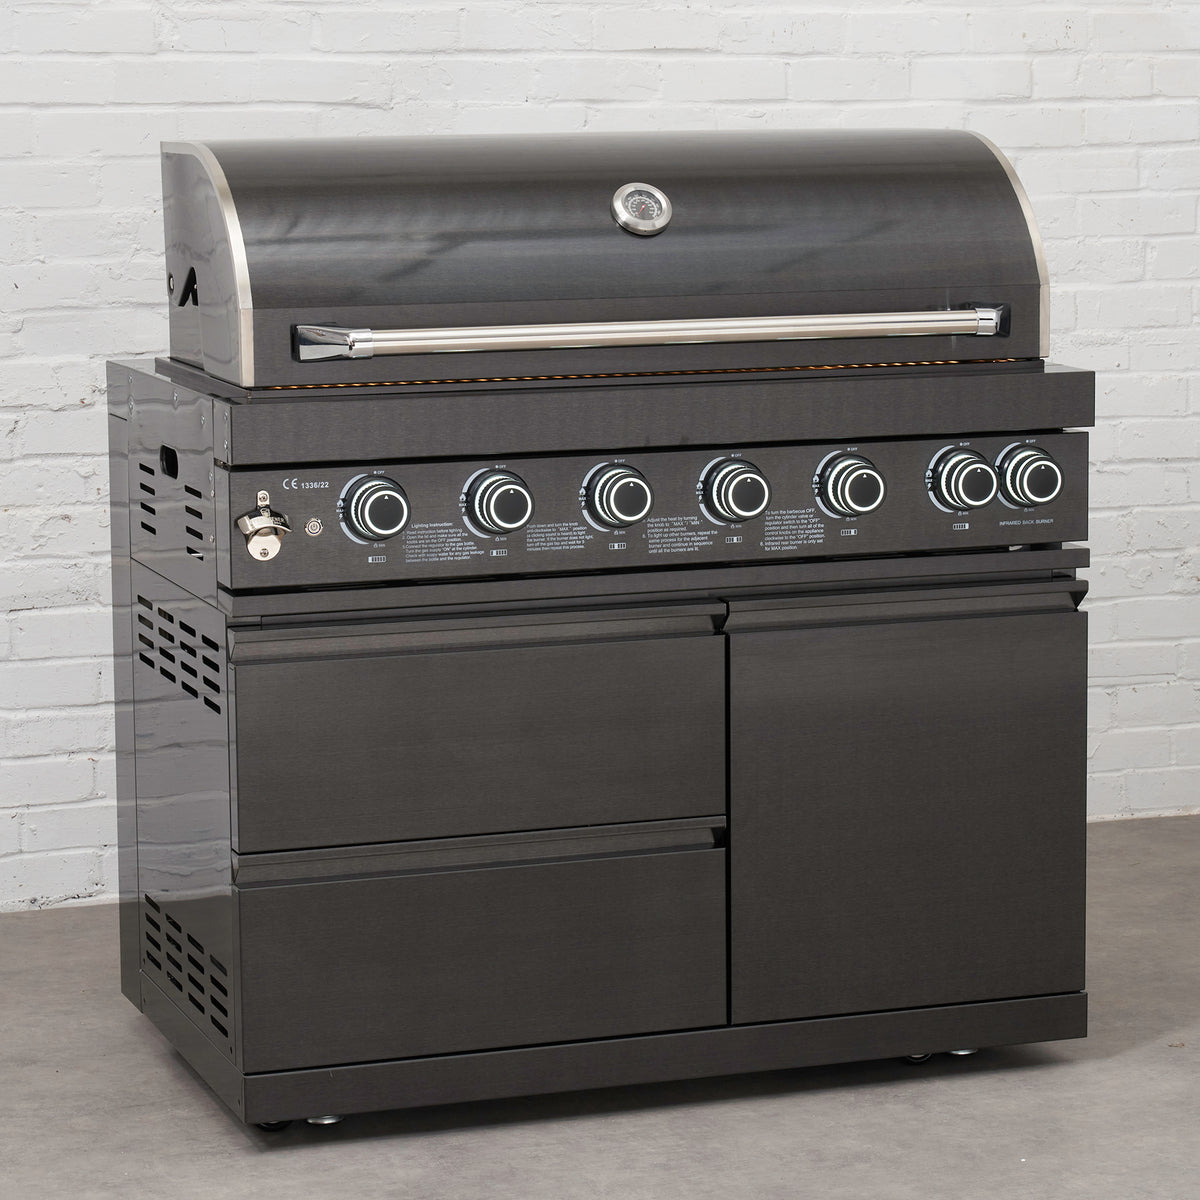 Draco Grills 6 Burner BBQ Black Stainless Steel Modular Outdoor Kitchen with Fridge and Sink Unit